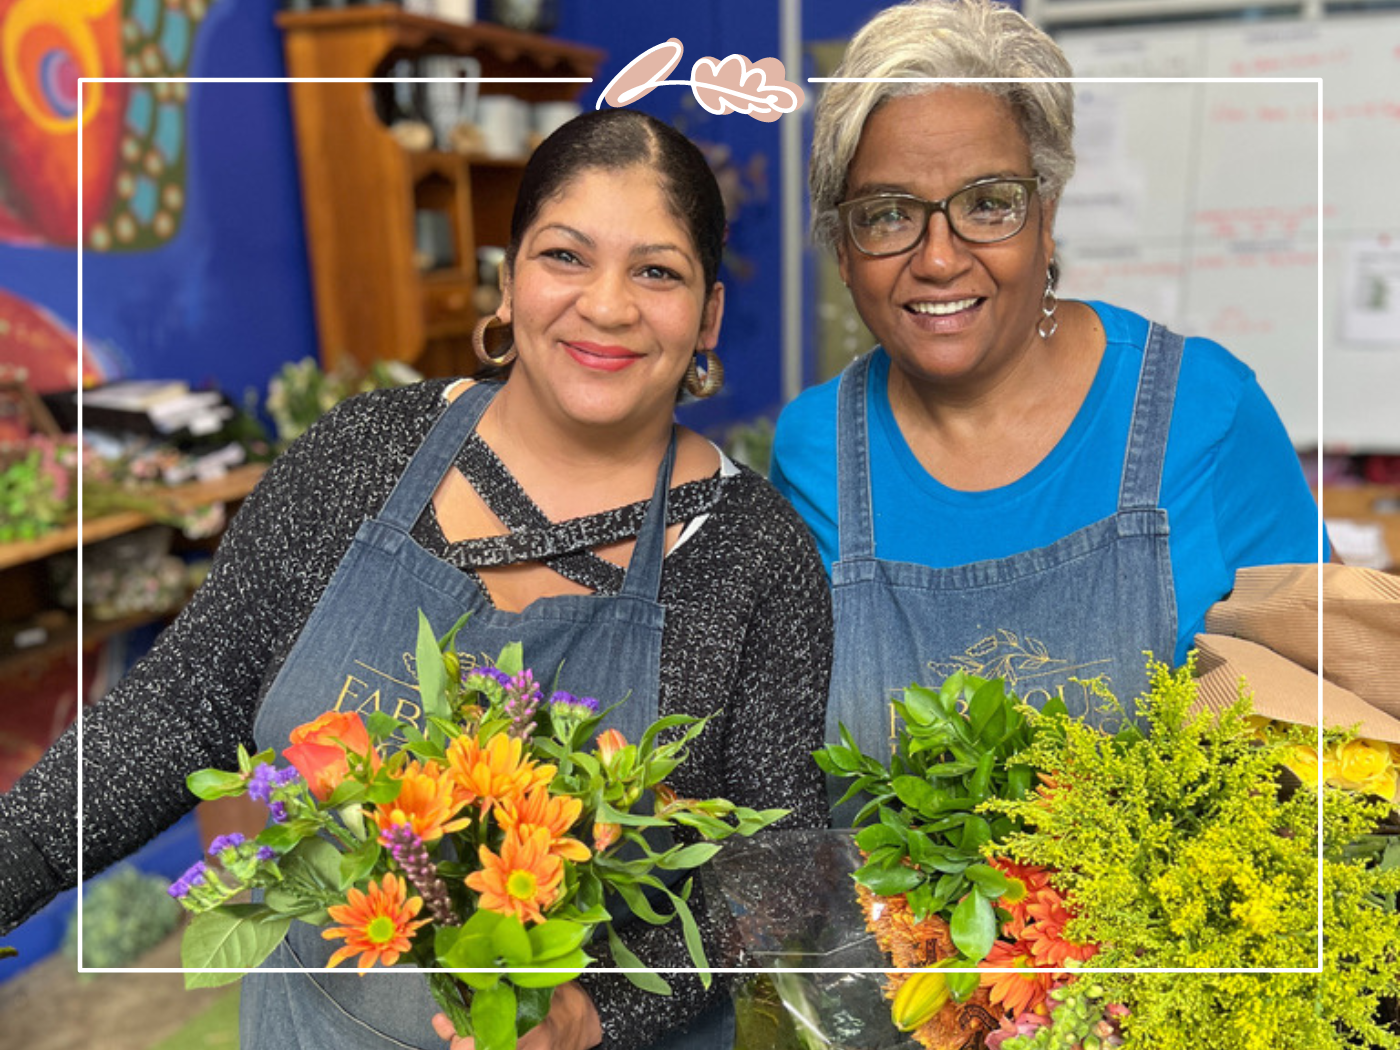 Two florists proudly display colourful flower arrangements at Bunches for Africa in Cape Town, Western Cape highlighting their dedication to creating beautiful bunches for weddings and events. Experience this at Fabulous Flowers and Gifts.